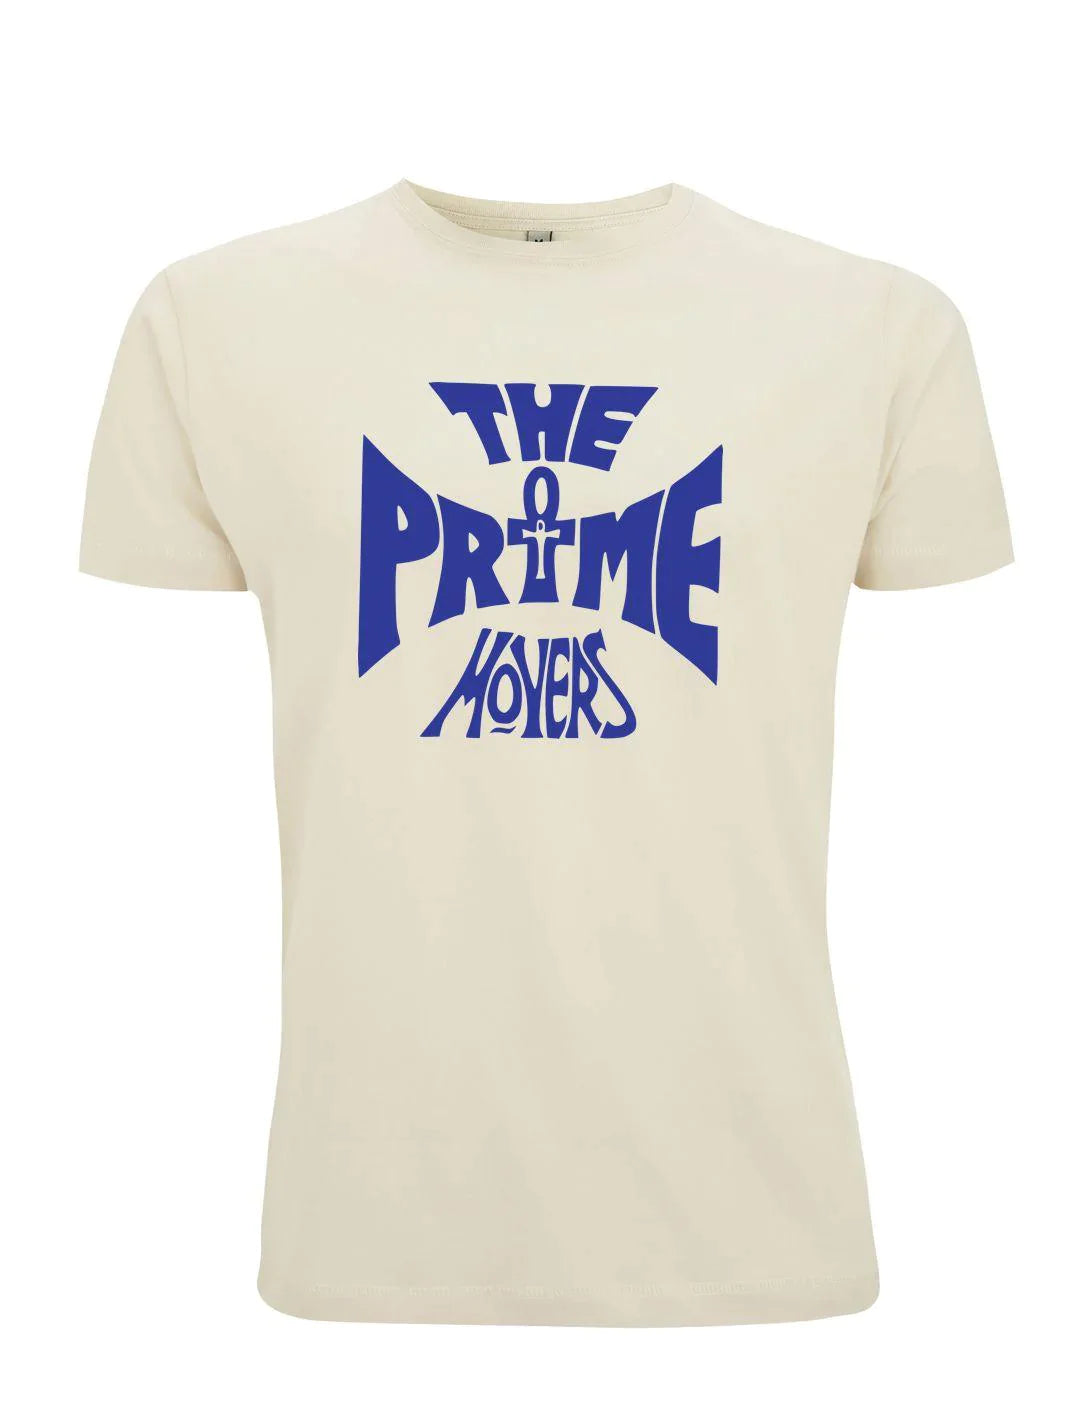 THE PRIME MOVERS: Logo T-Shirt, medway garage